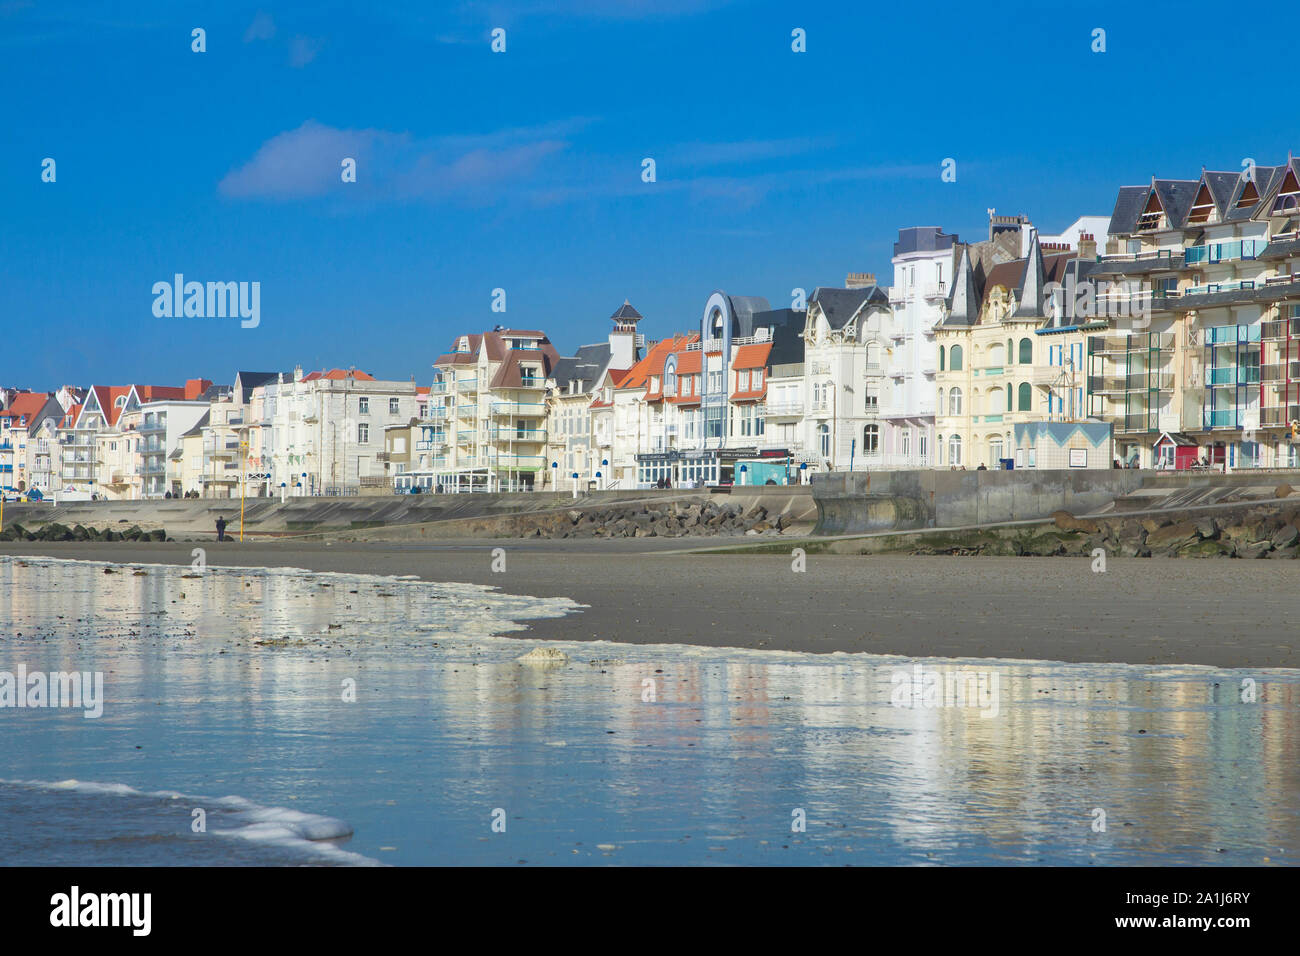 Wimereux (northern France), along the 'Cote d'Opale' coastal area. Villas and buildings along the waterfront Stock Photo